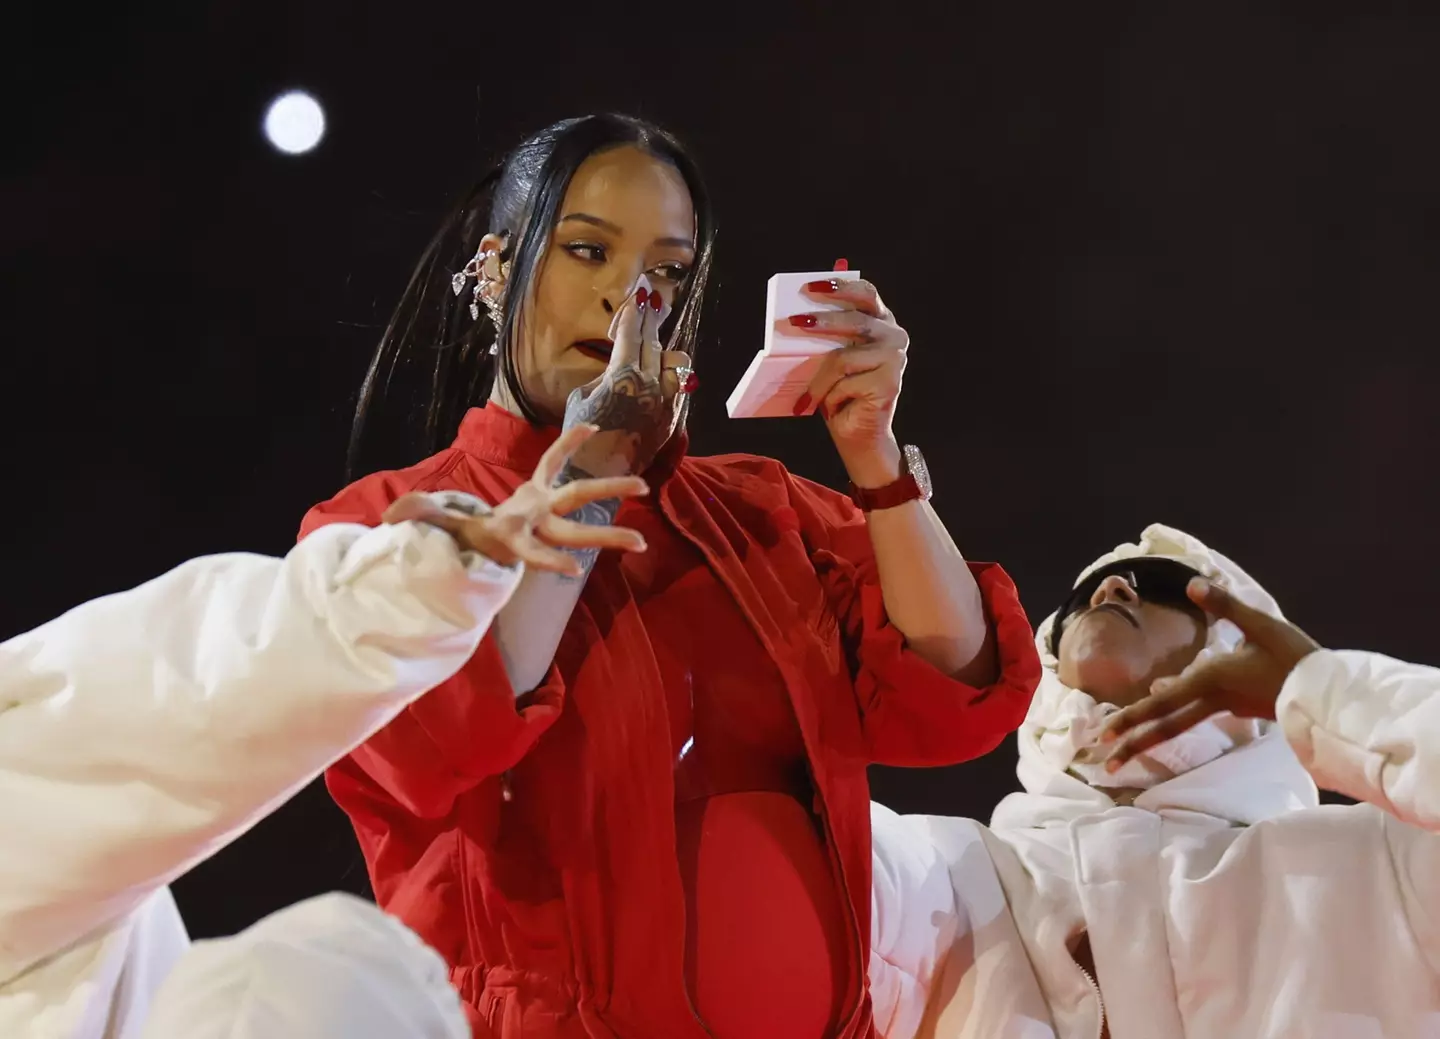 Rihanna has been praised for her performance.